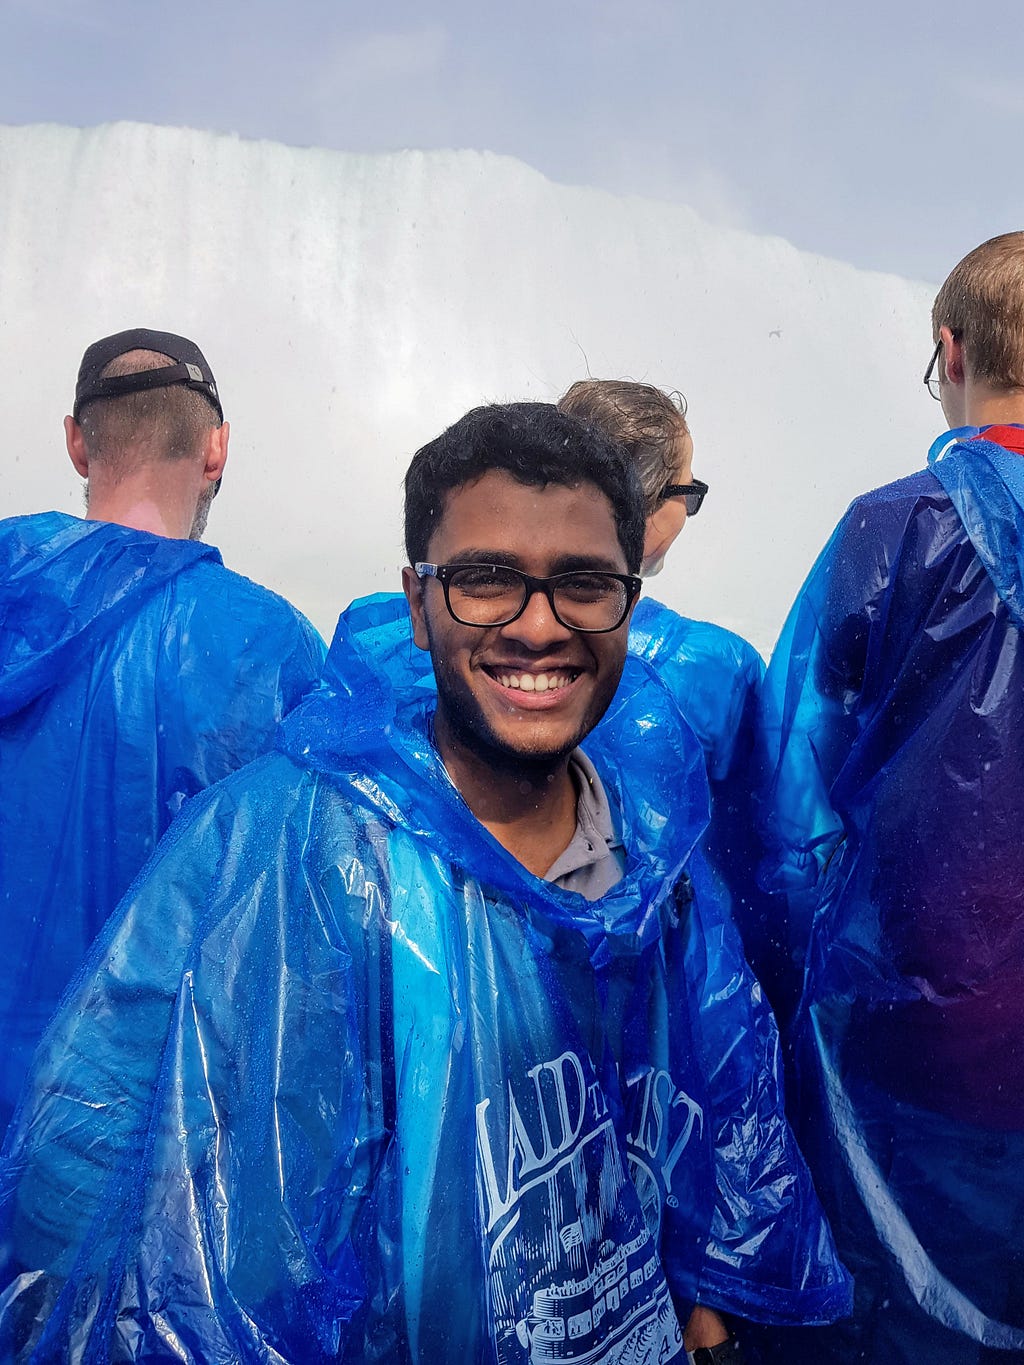 Me standing on the maid of the mist